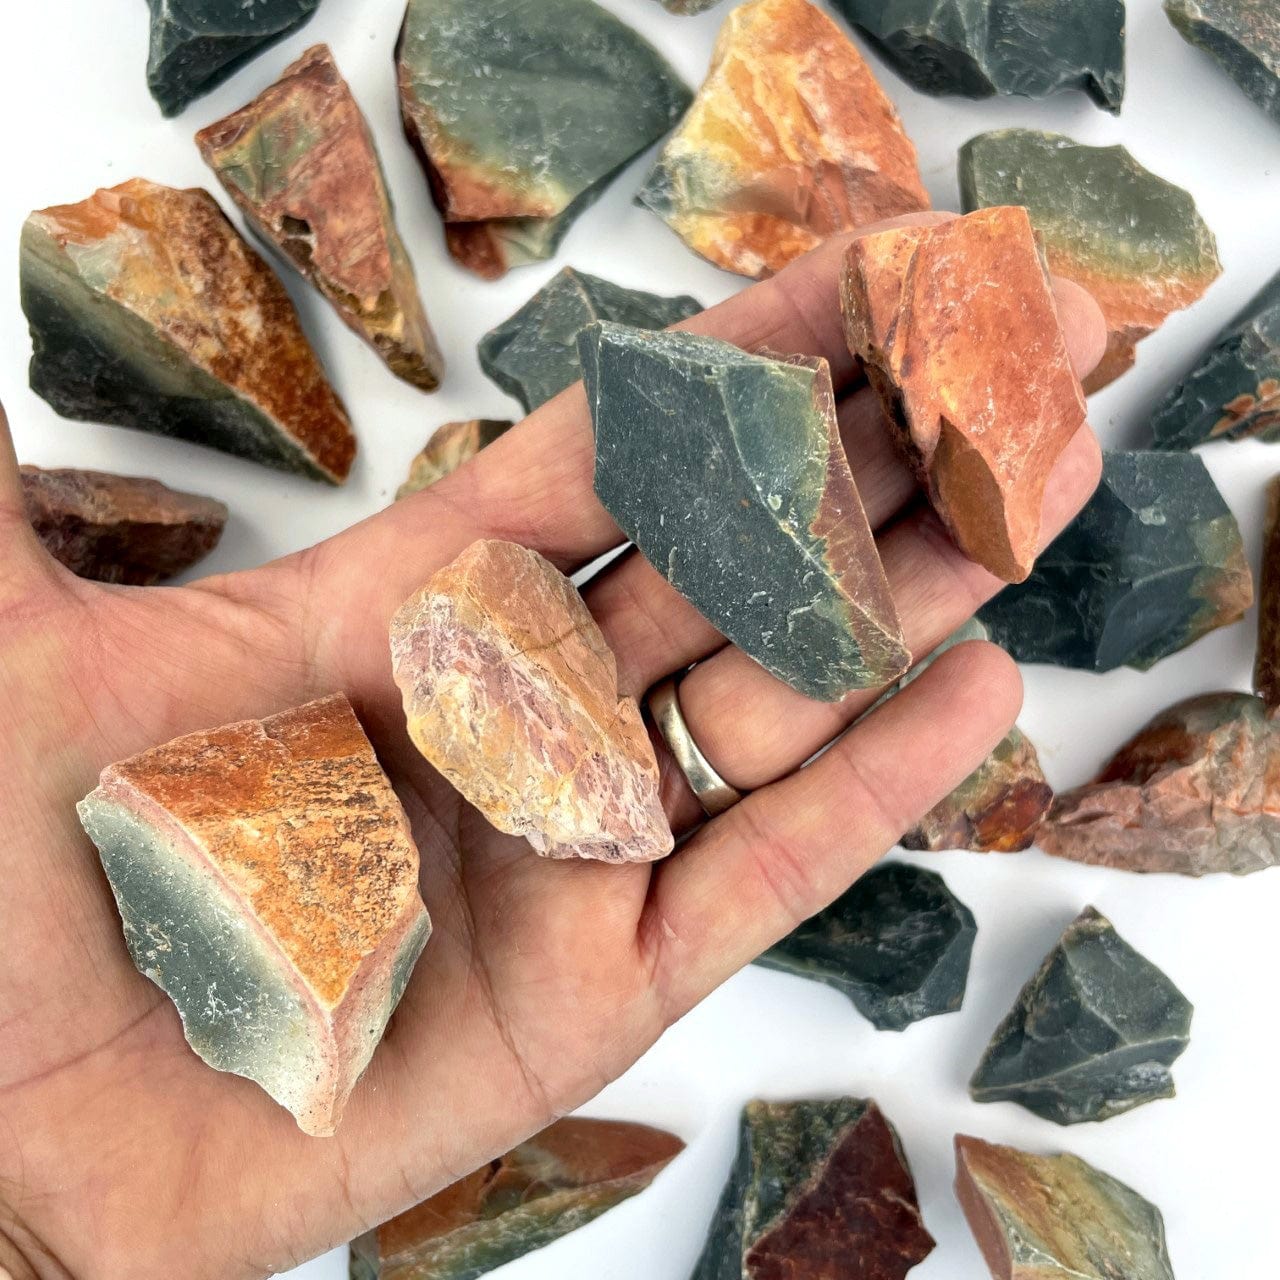 Polychrome Jasper Rough Chunks with 4 in the hand for size reference